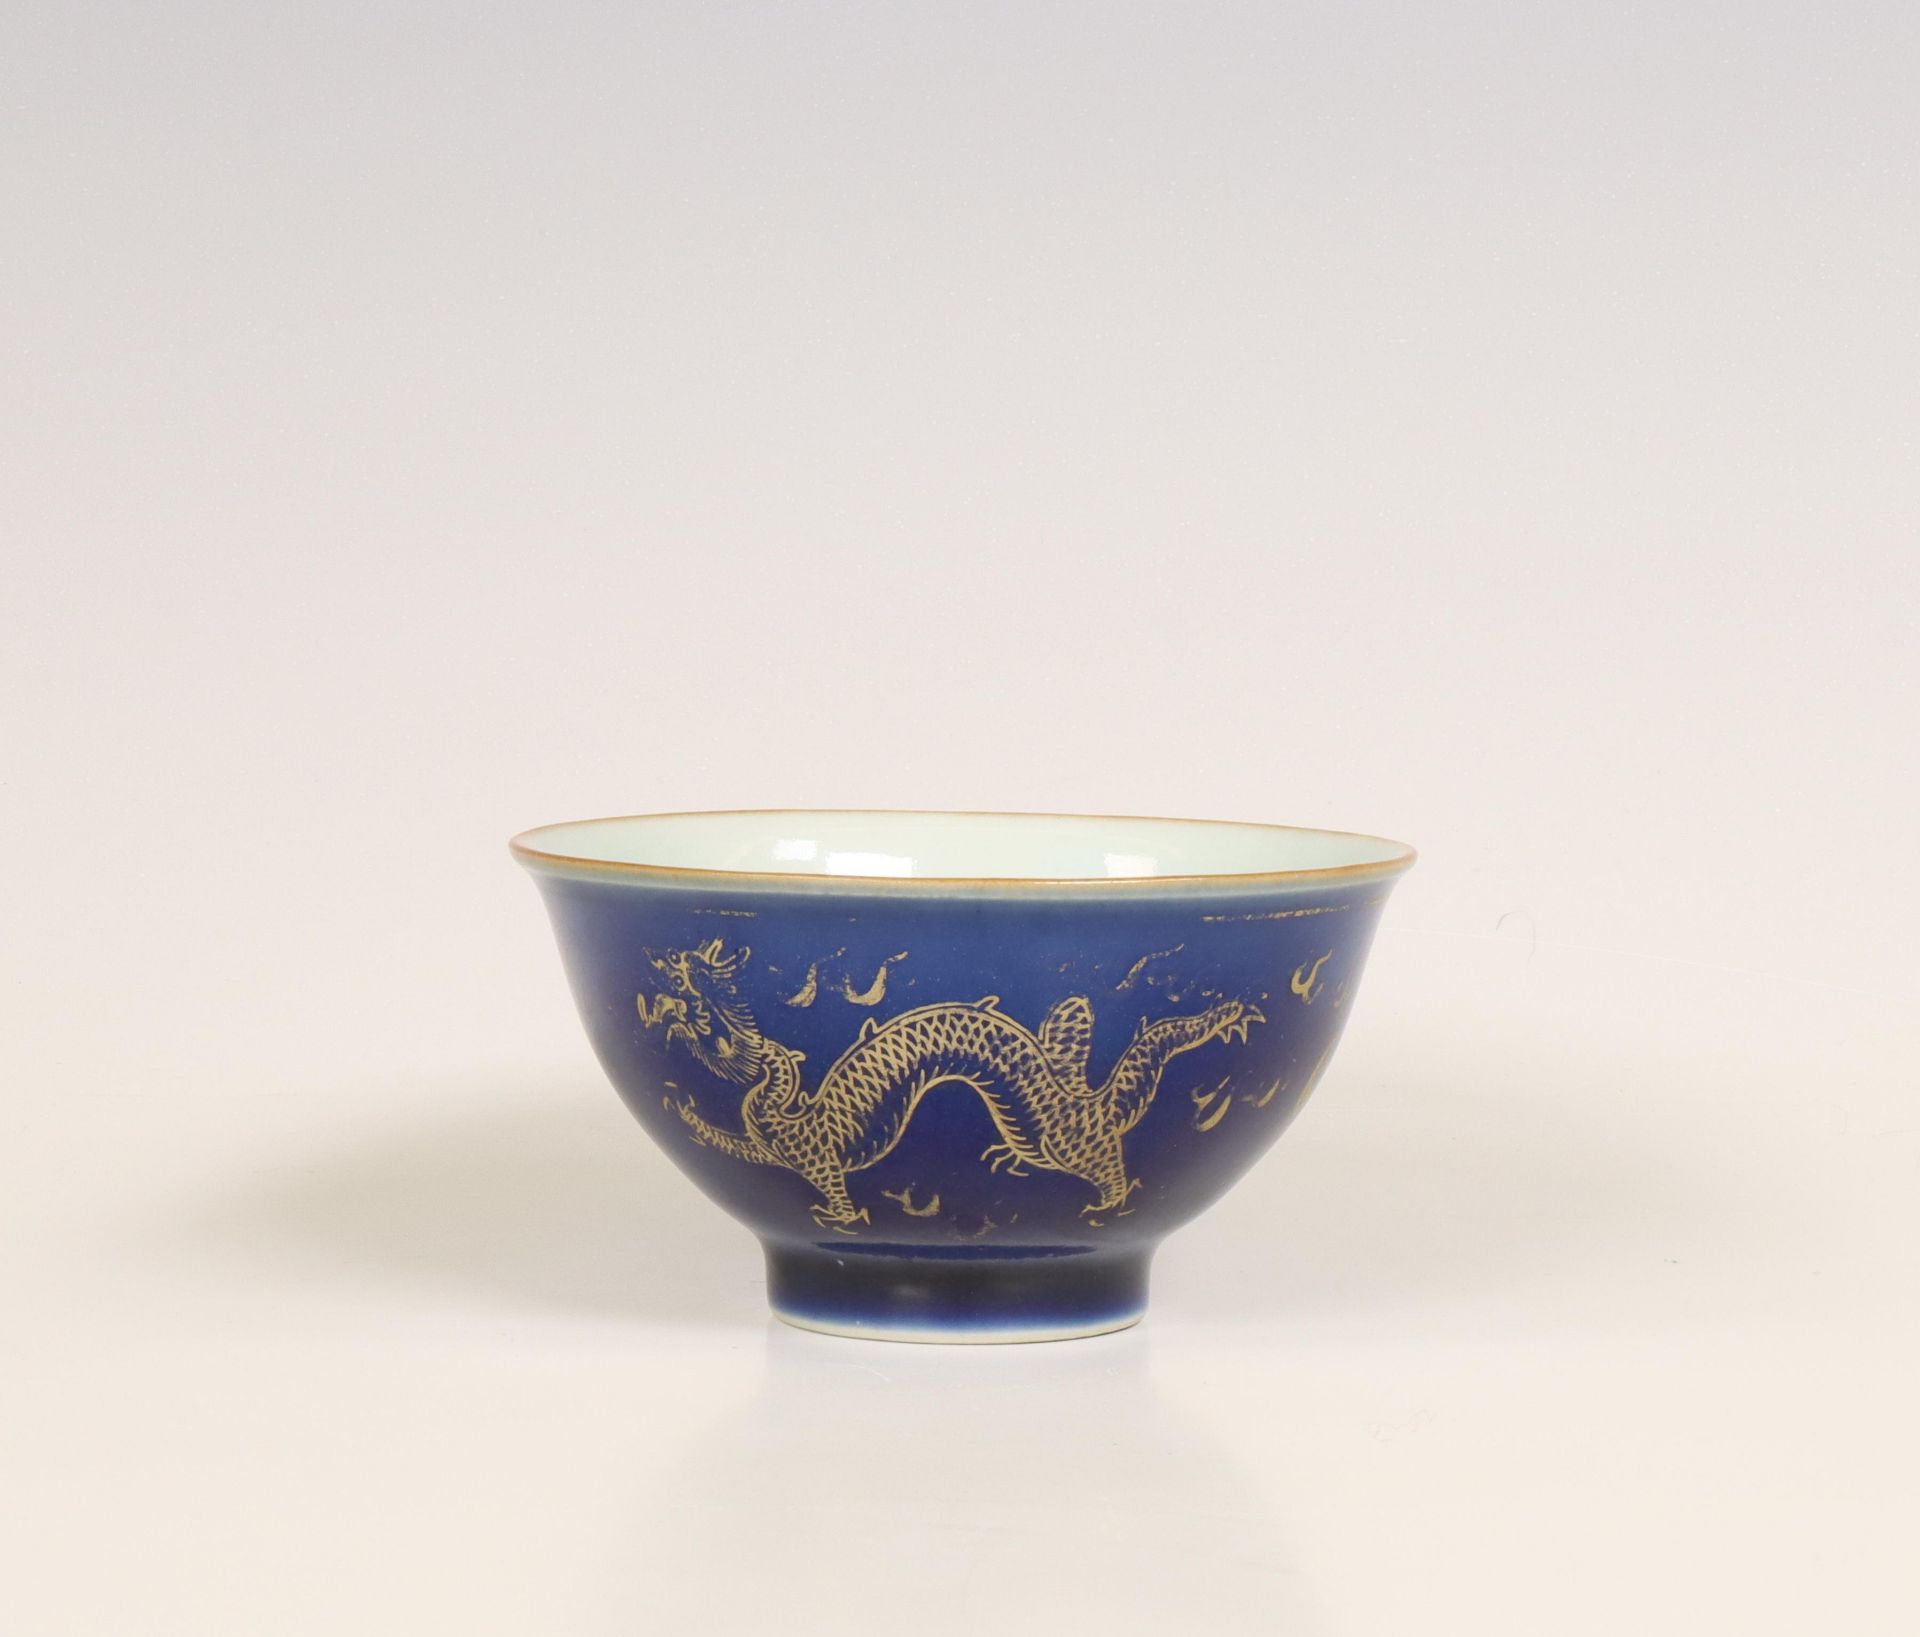 China, powder-blue-ground gilt-decorated bowl, late Qing dynasty (1644-1912),